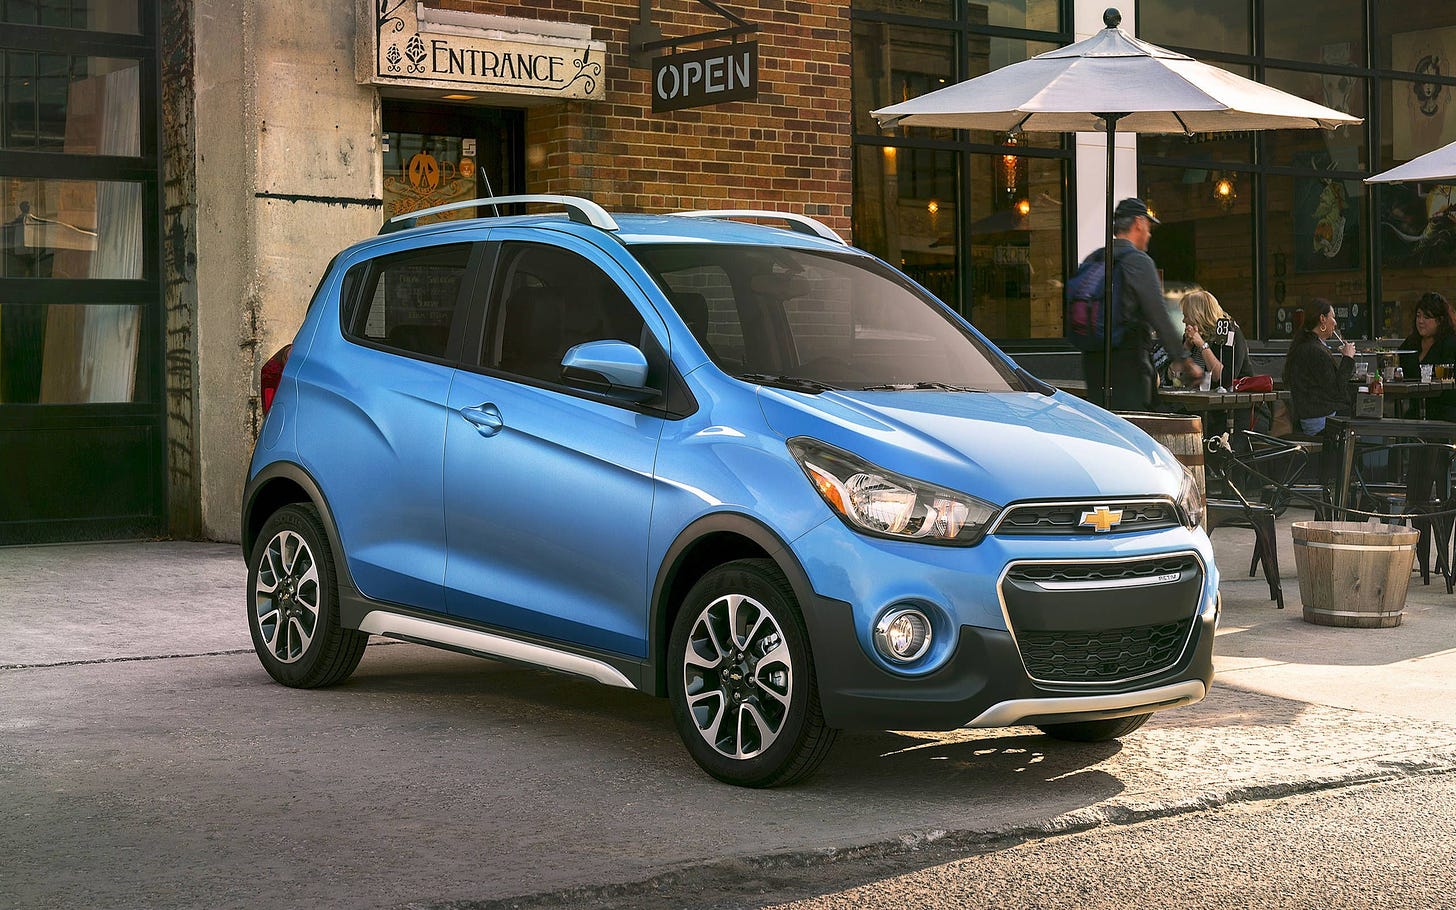 Chevy Spark Activ tries to tempt cheap crossover buyers